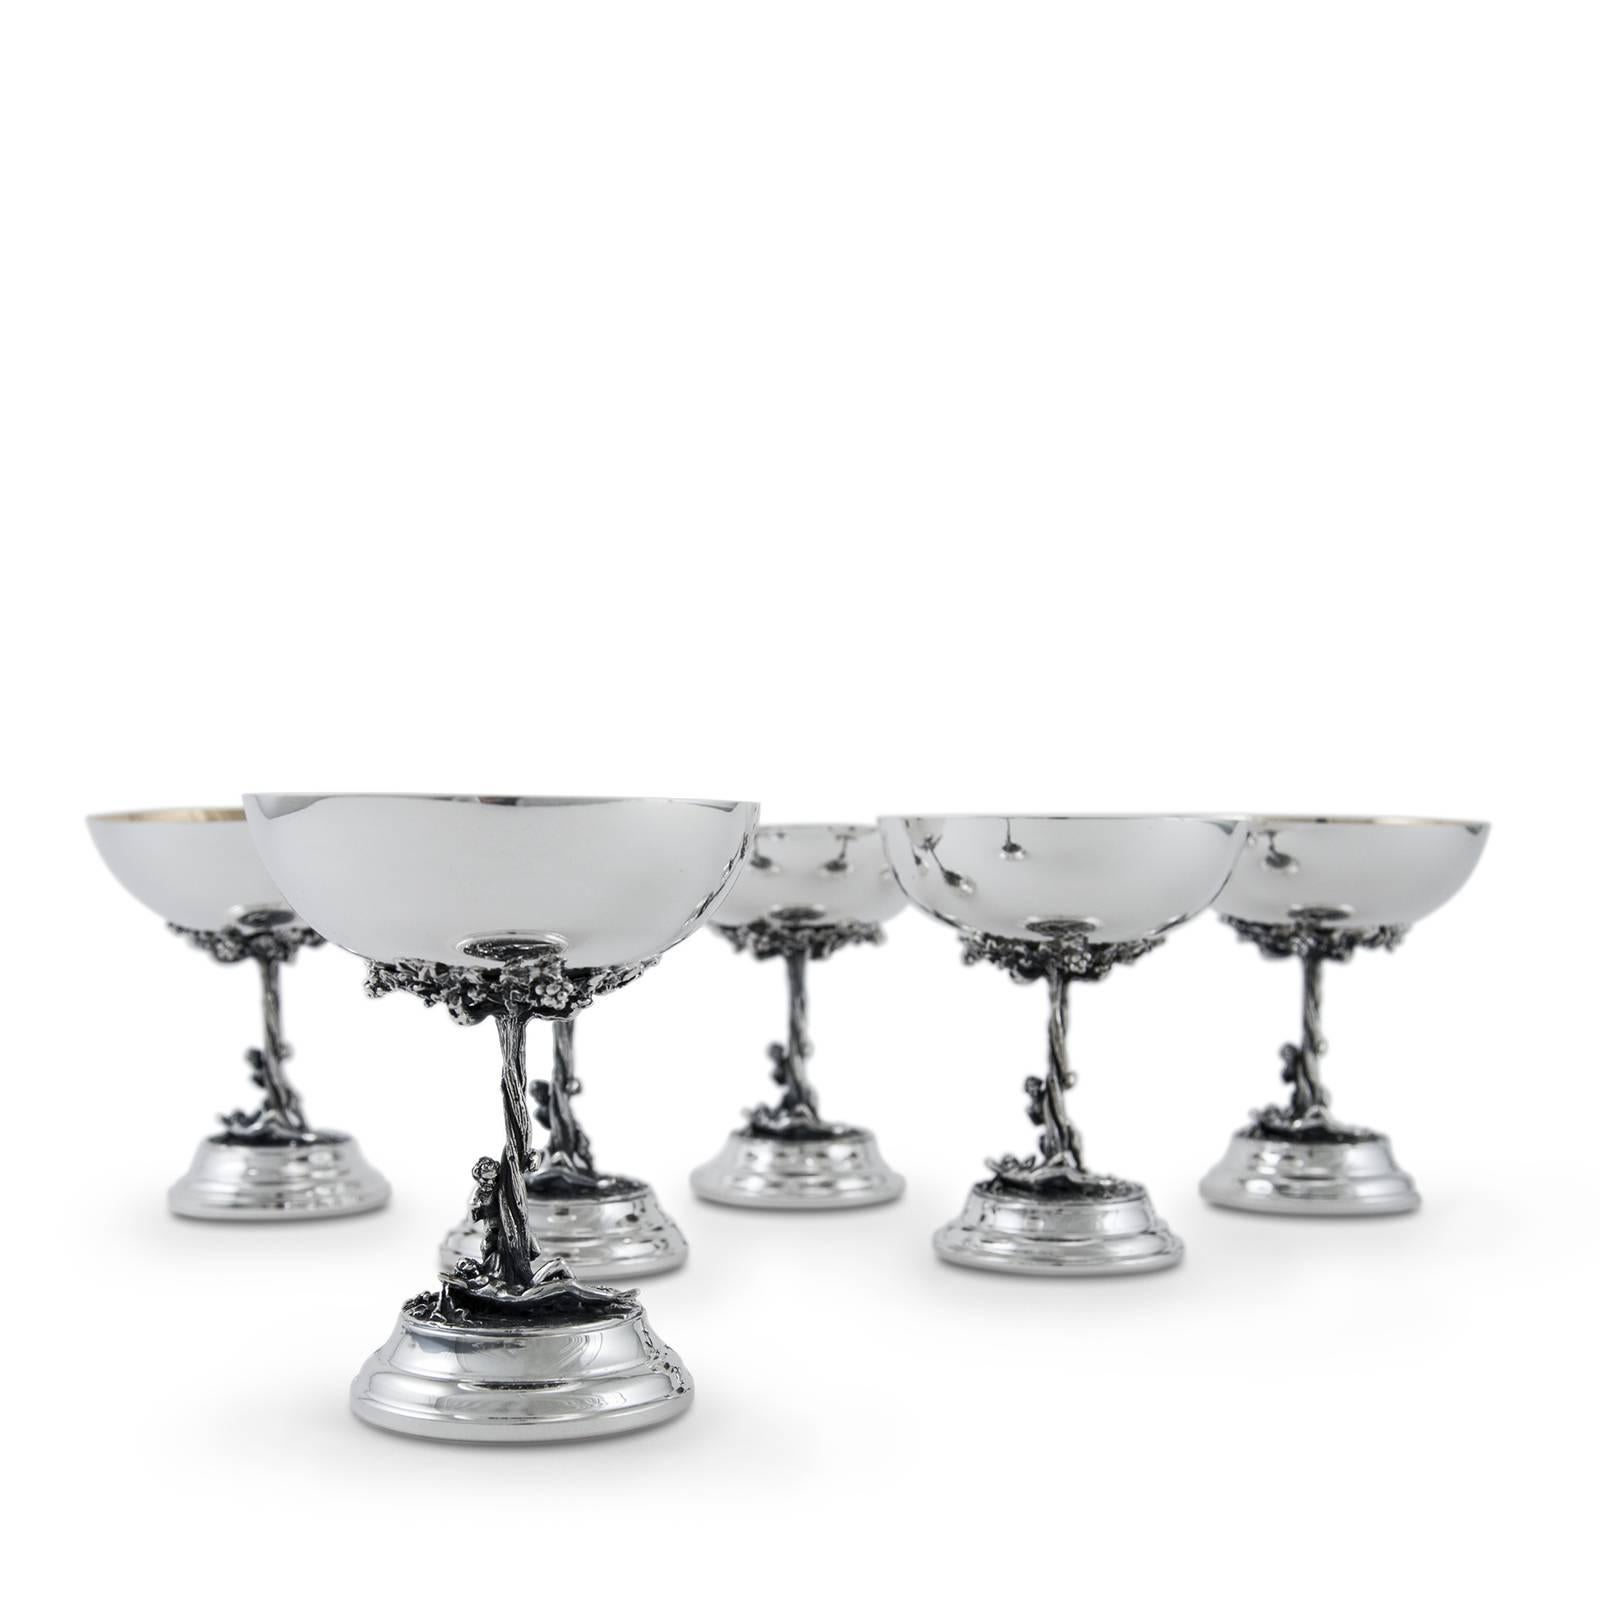 An ode to ancient Roman myth and traditional craftsmanship, this chalice is an elegant and unique work of art exquisitely crafted of silver by expert craftsmen. The smooth surface of the round base and semi-spherical cup are enriched by the stunning